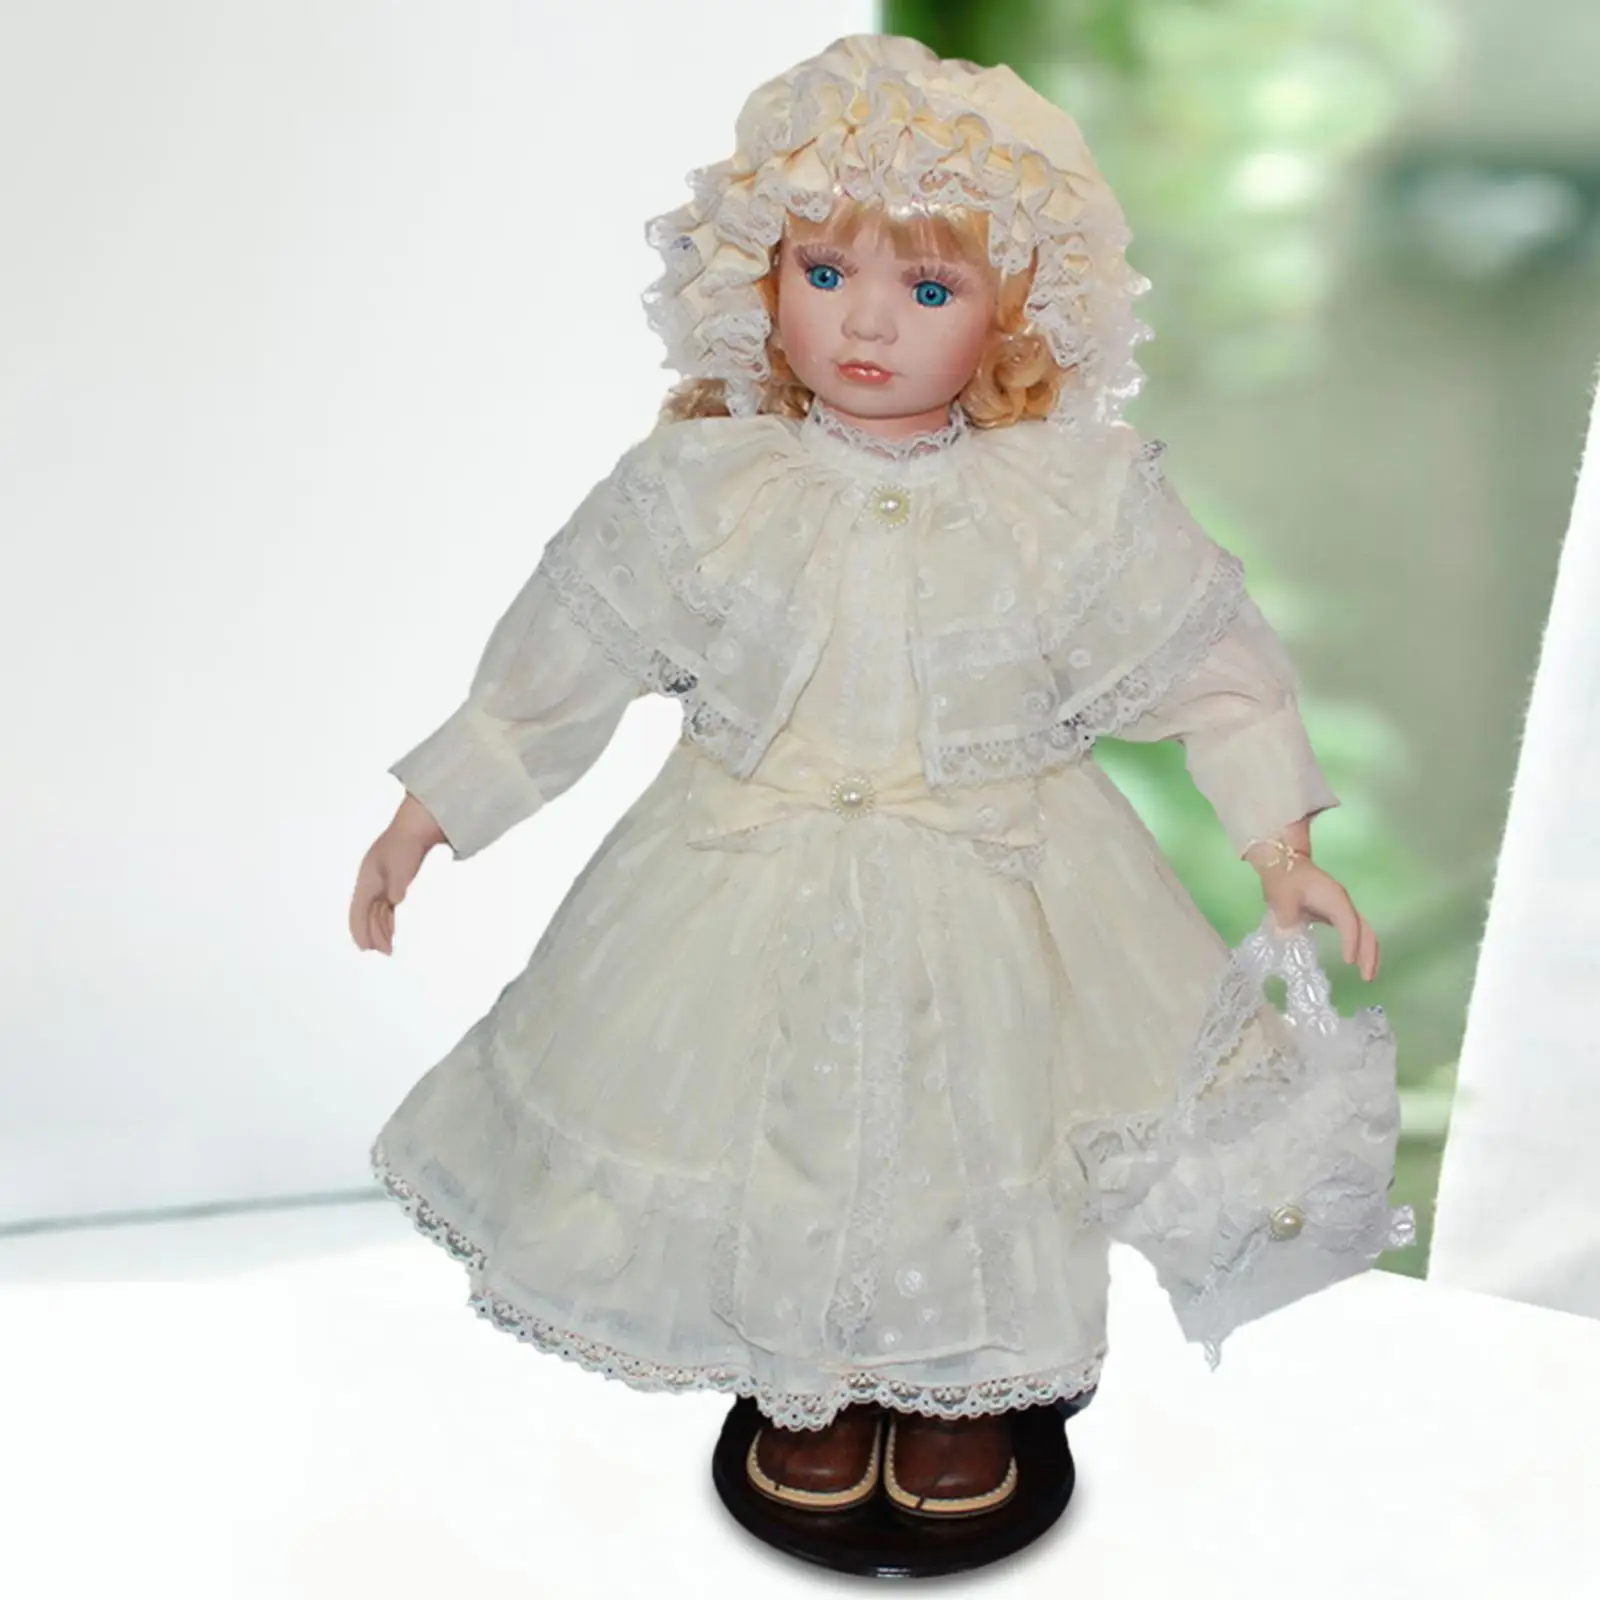 24inch Miniature Porcelain People Long Hair Girl Doll for Preschool Activity